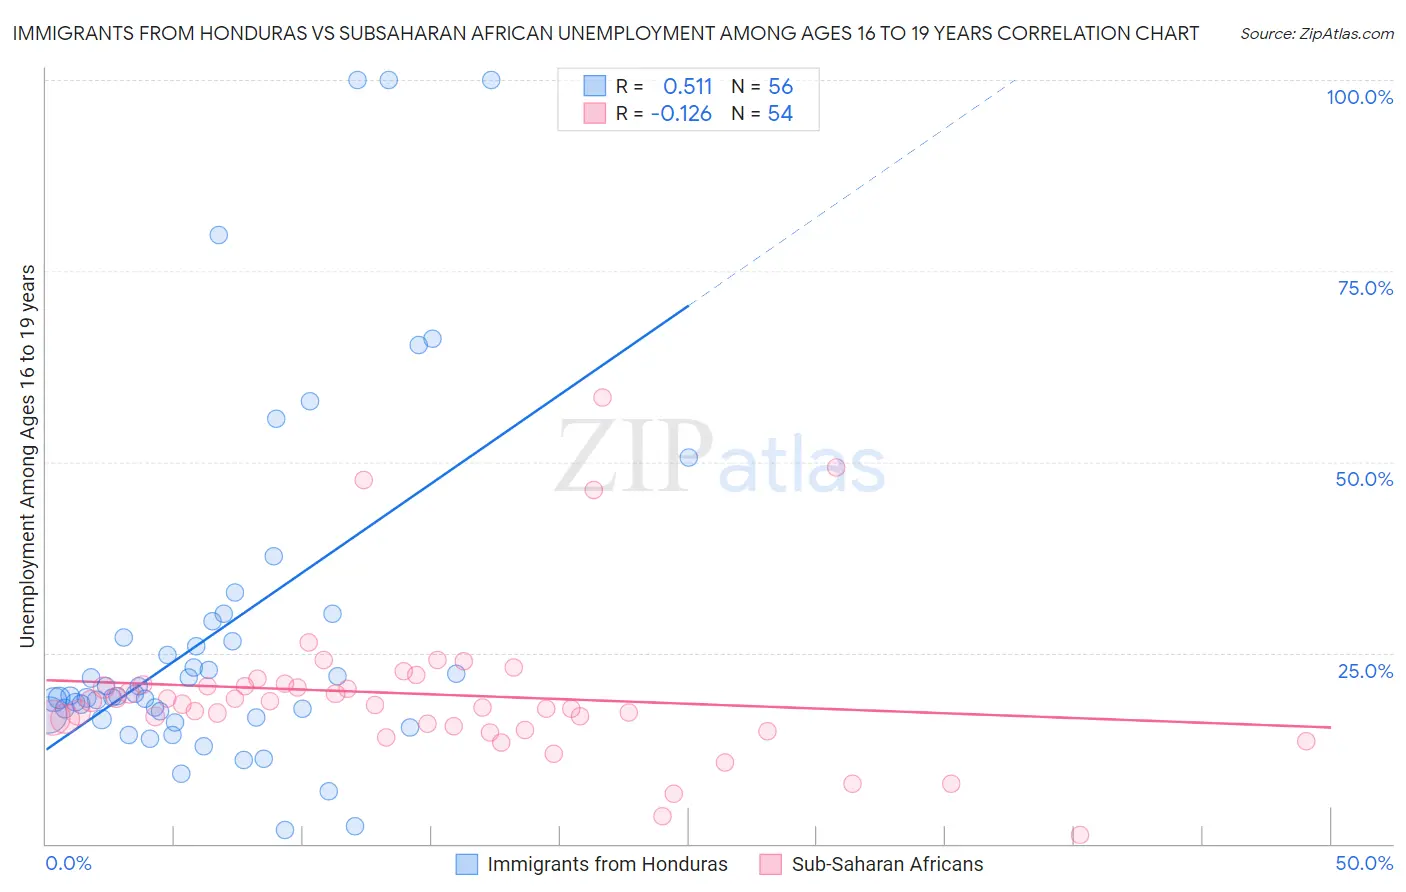 Immigrants from Honduras vs Subsaharan African Unemployment Among Ages 16 to 19 years